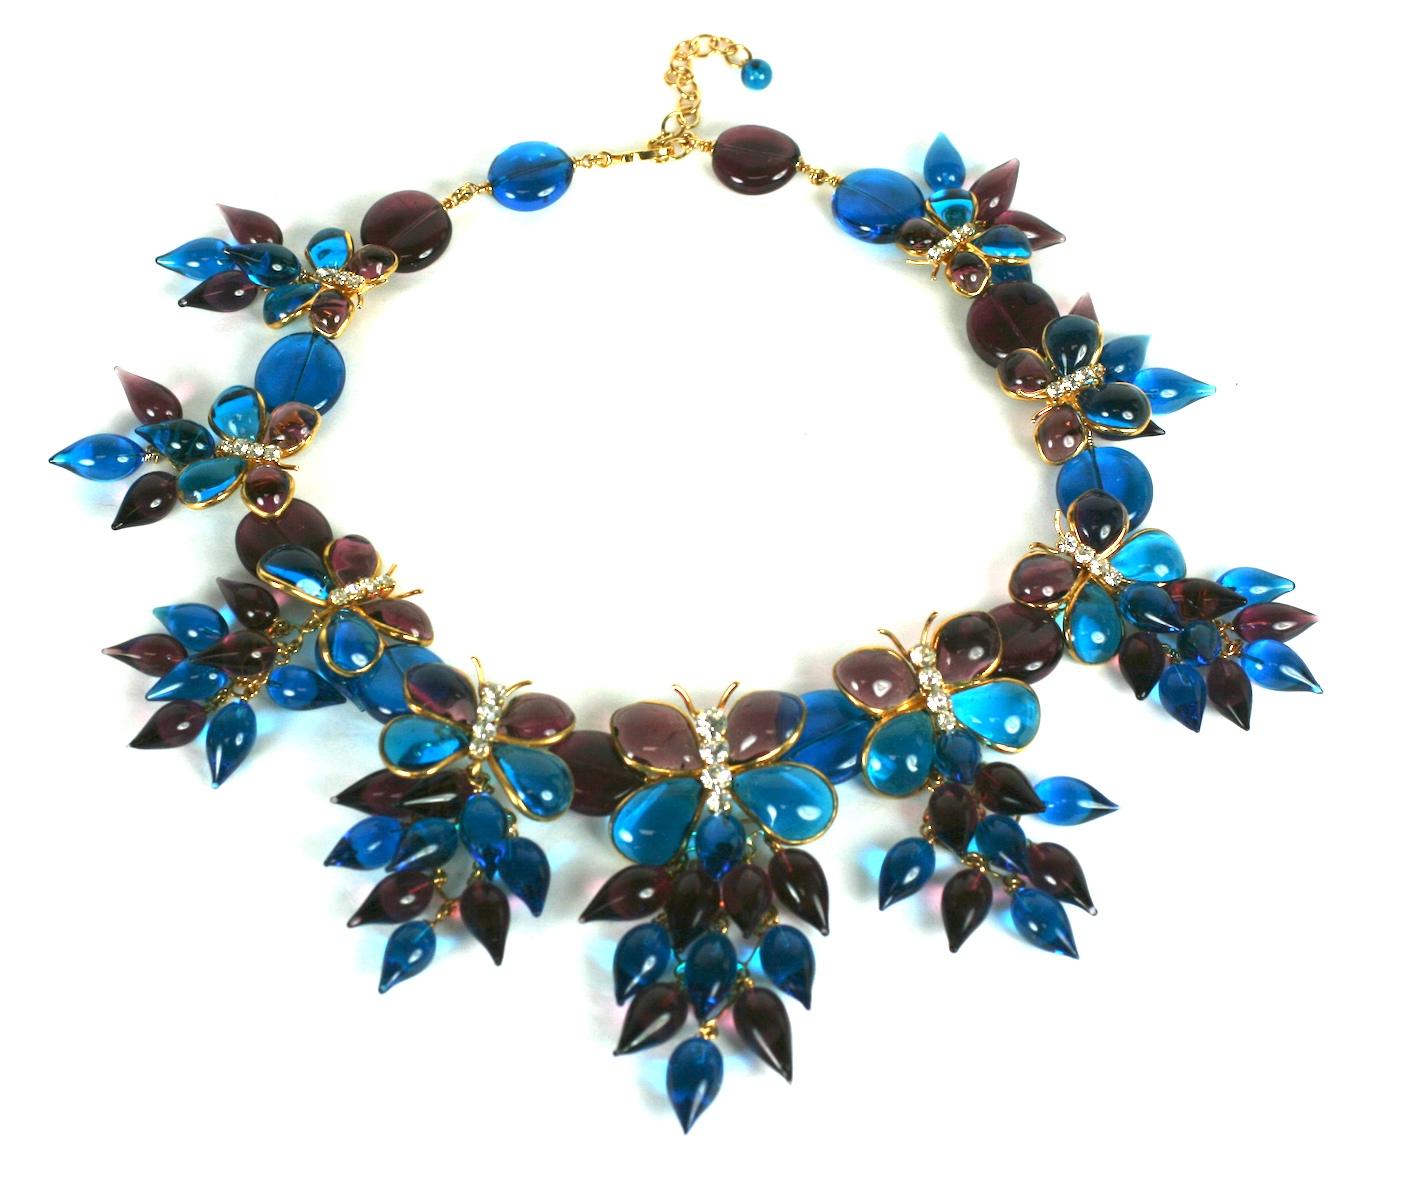 Large and Important Maison Gripoix for Yves Saint Laurent butterfly bib necklace circa 1970. Of amythest and deep aquamarine Gripoix poured glass enamel. Composed of asymmetrically color blocked butterflies with crystal rhinestone accents. Falling